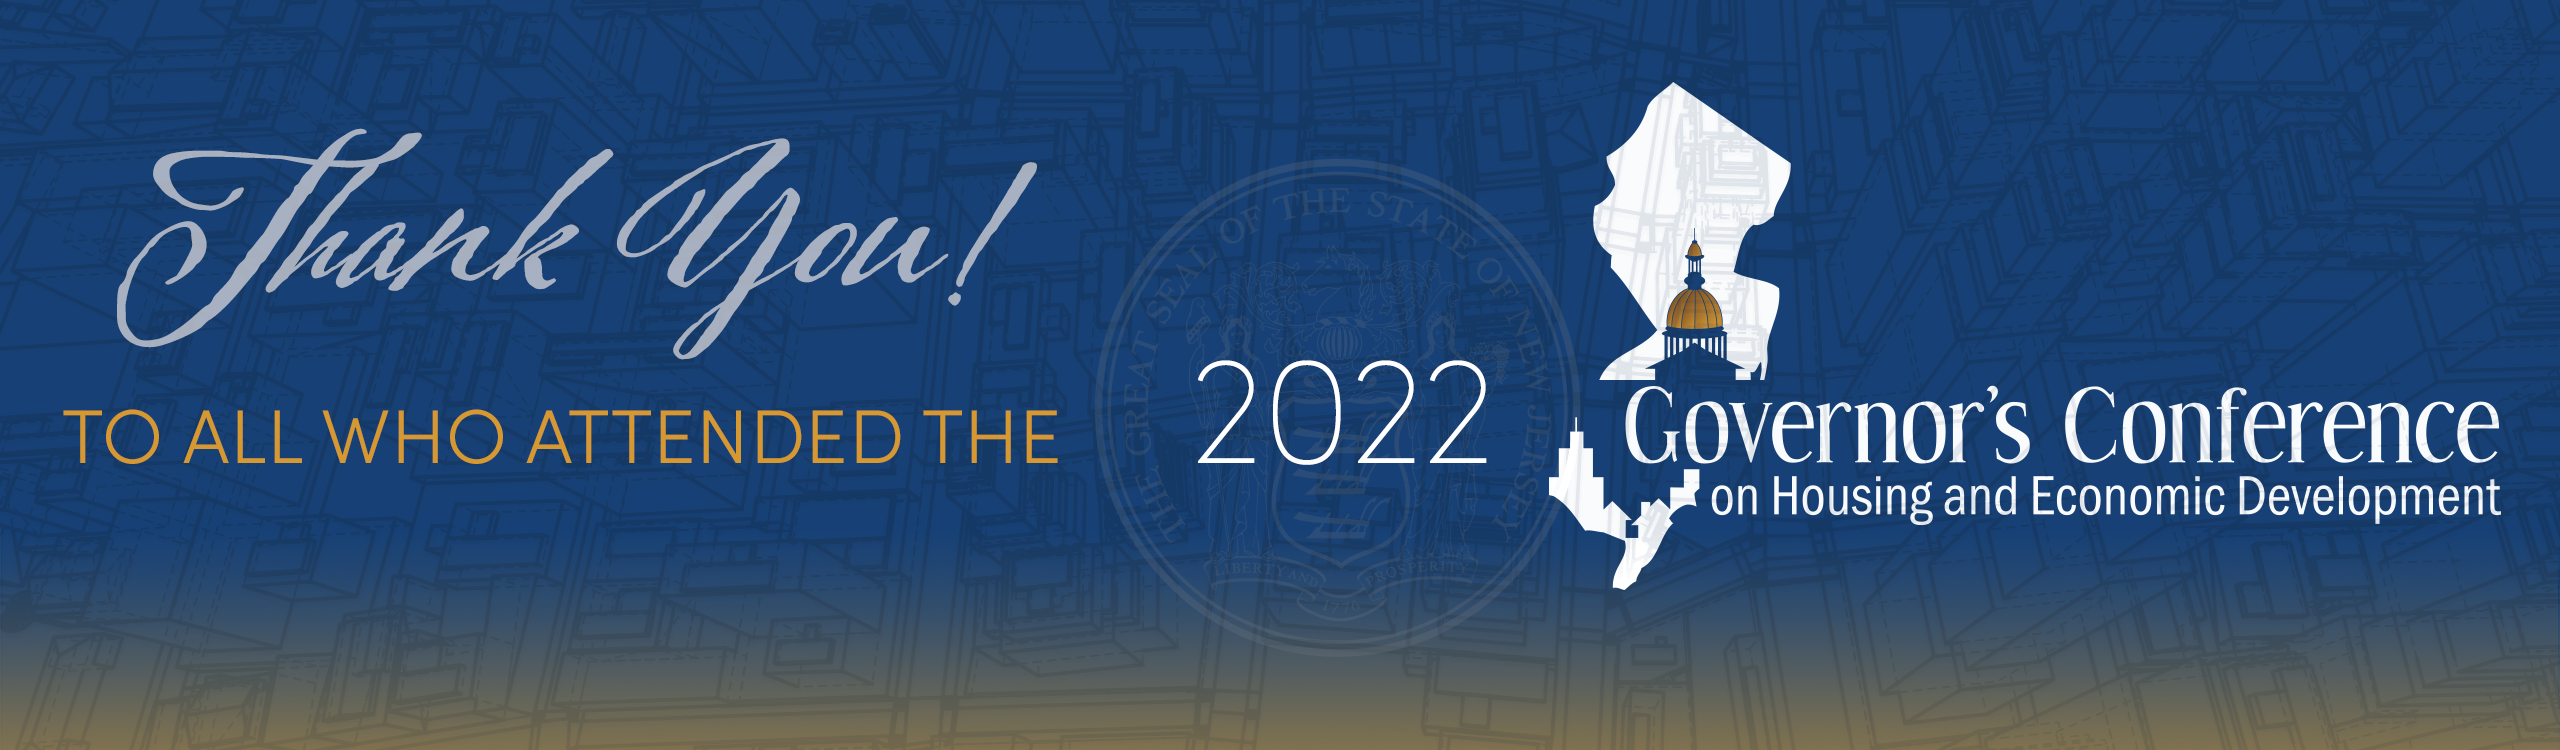 2022 Governor's Conference on Housing and Economic Development